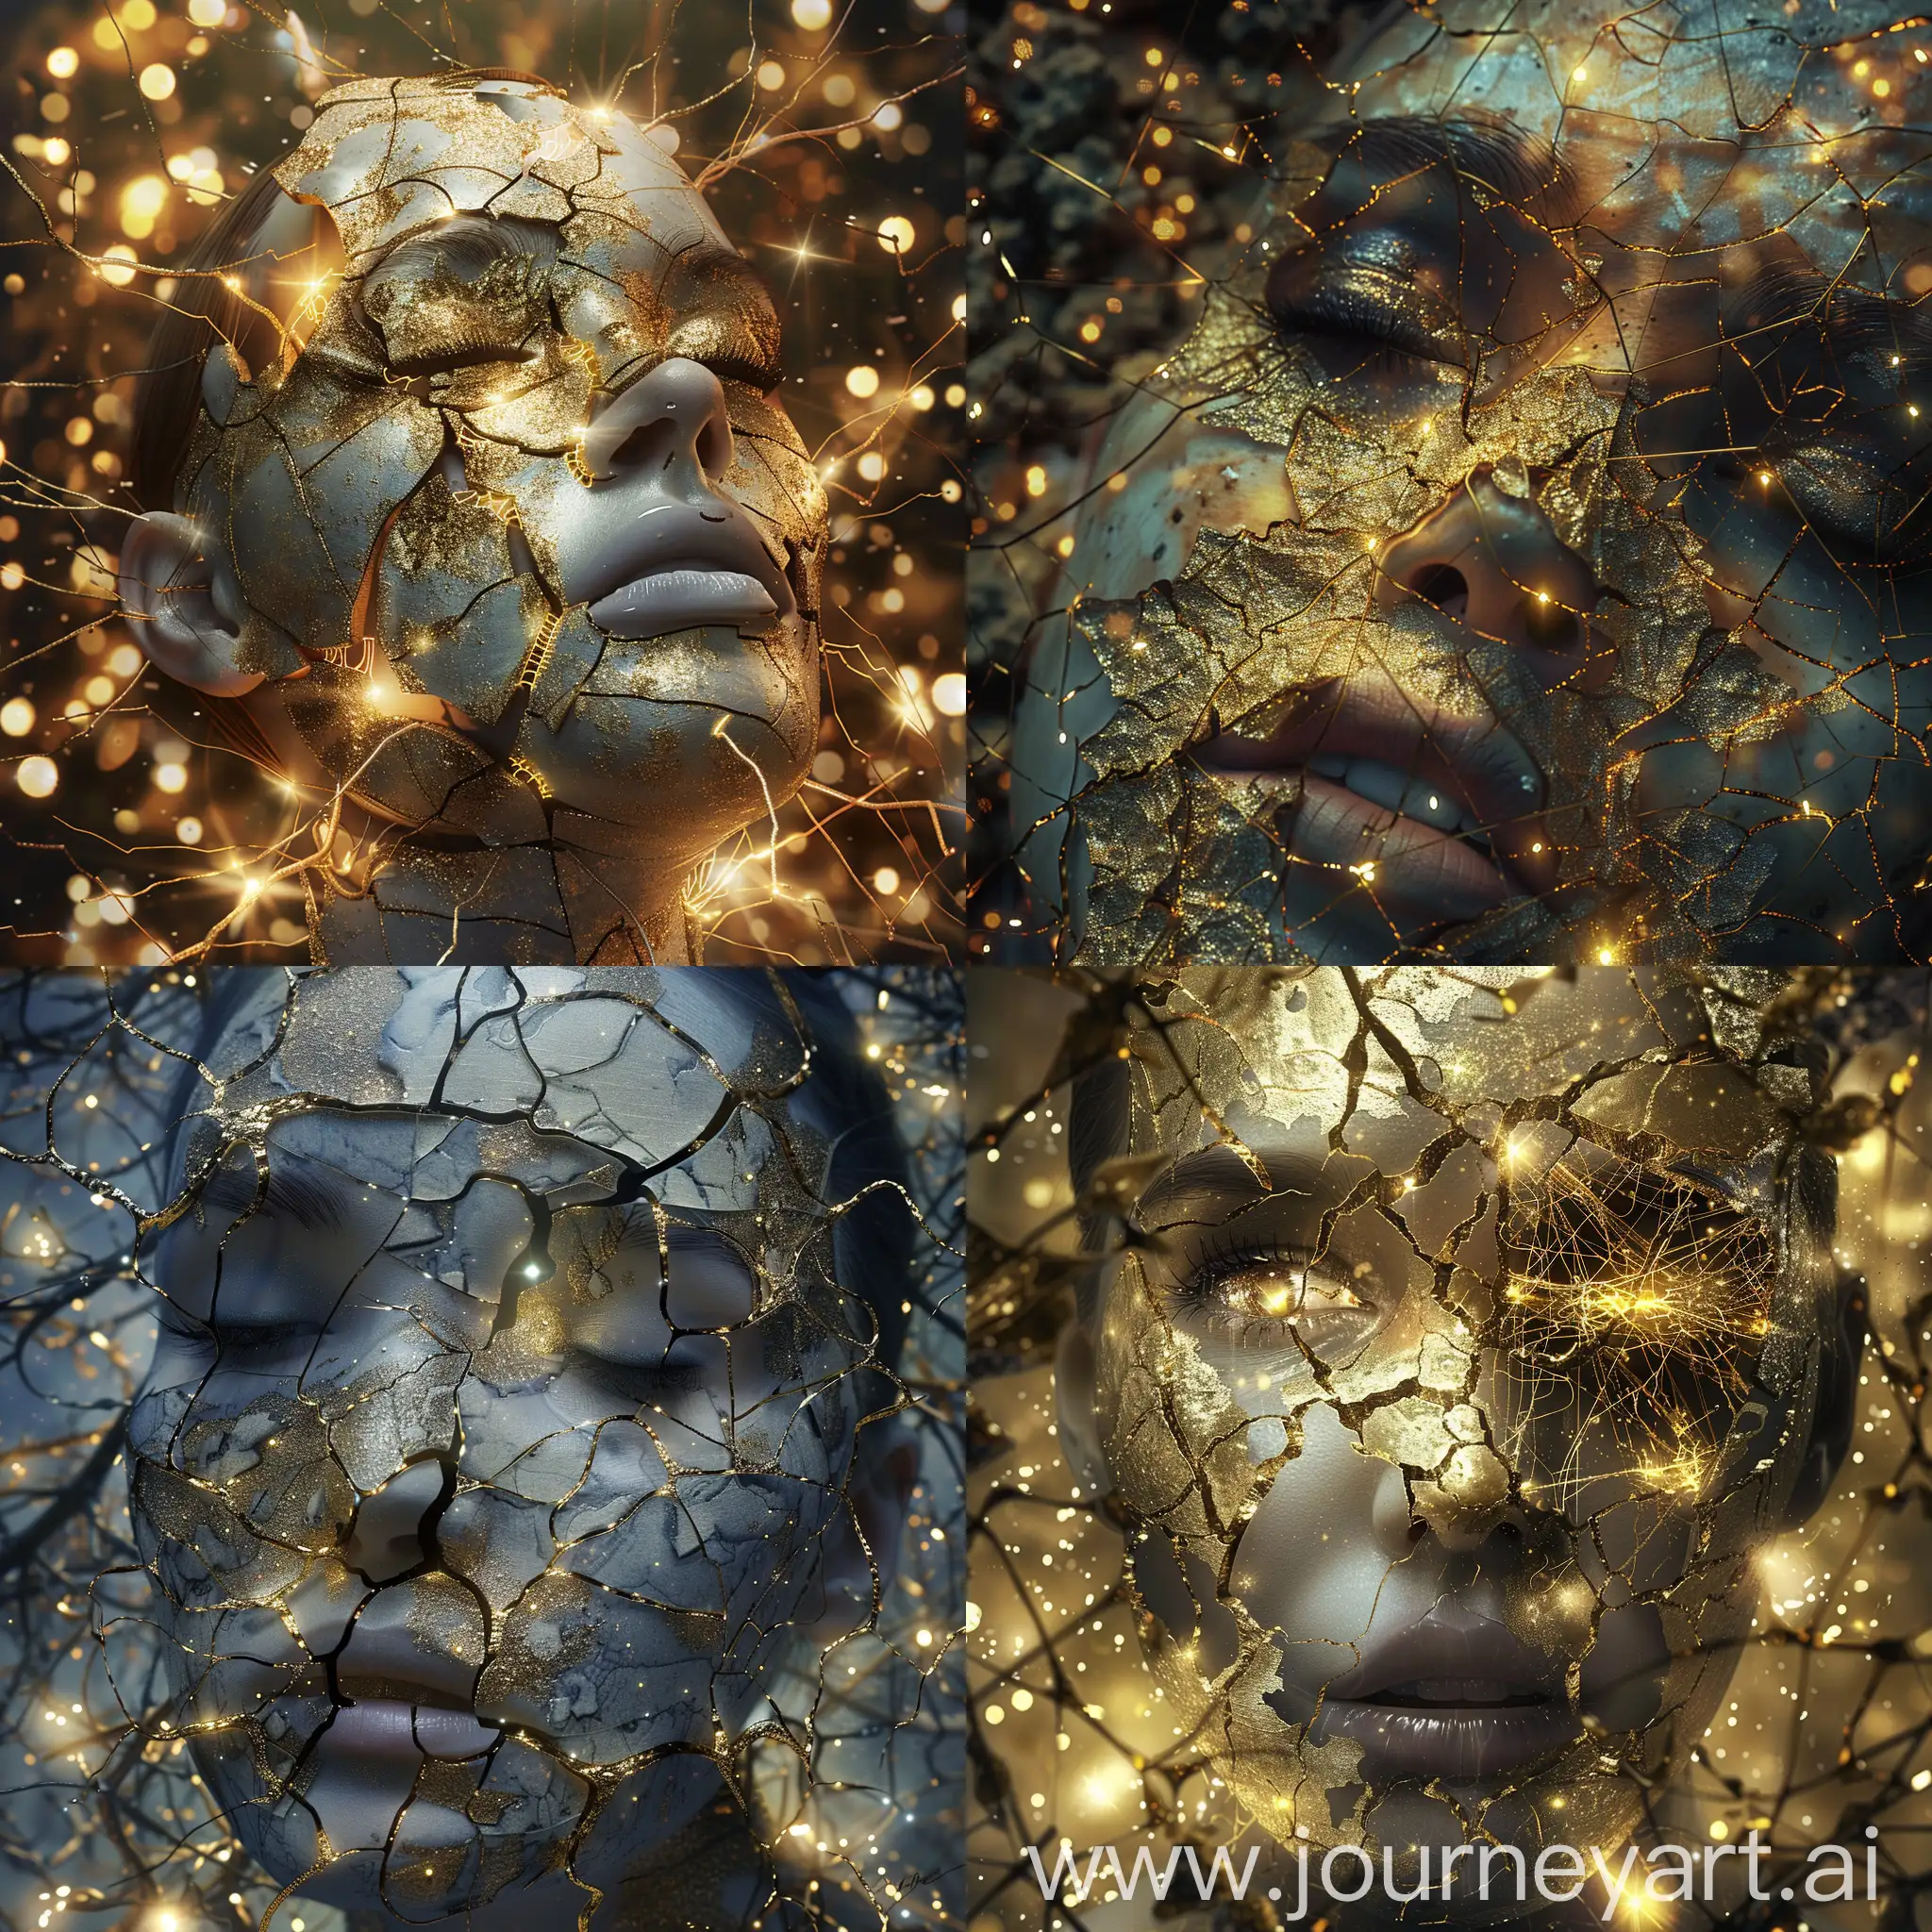 Surreal-Golden-Repaired-Female-Face-Reflecting-Fragility-of-Humanity